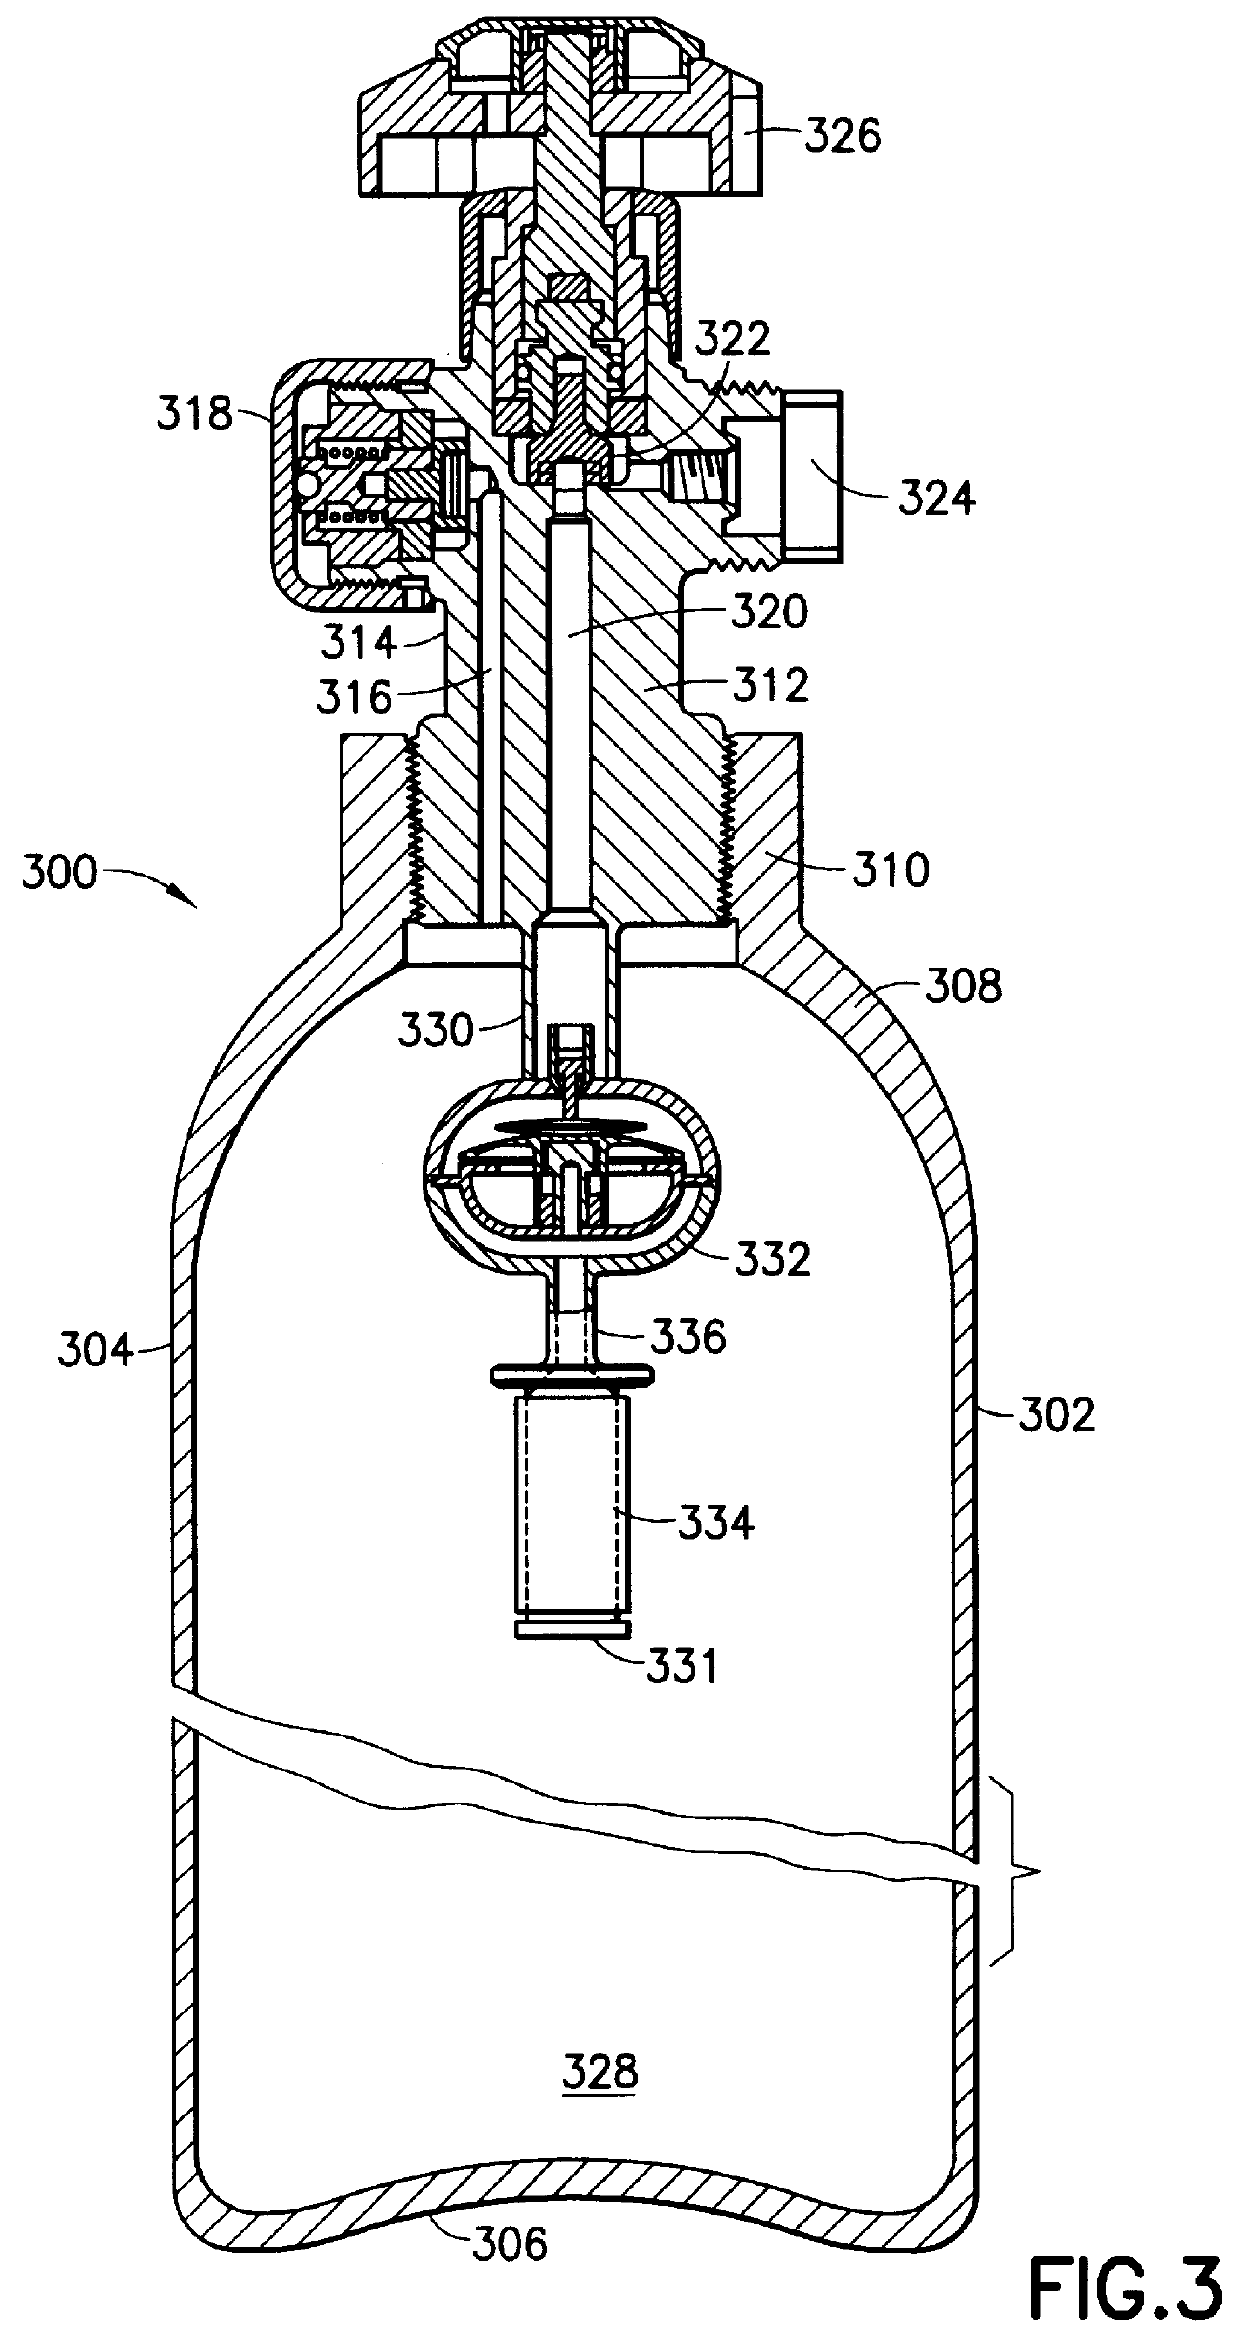 Fluid storage and dispensing system